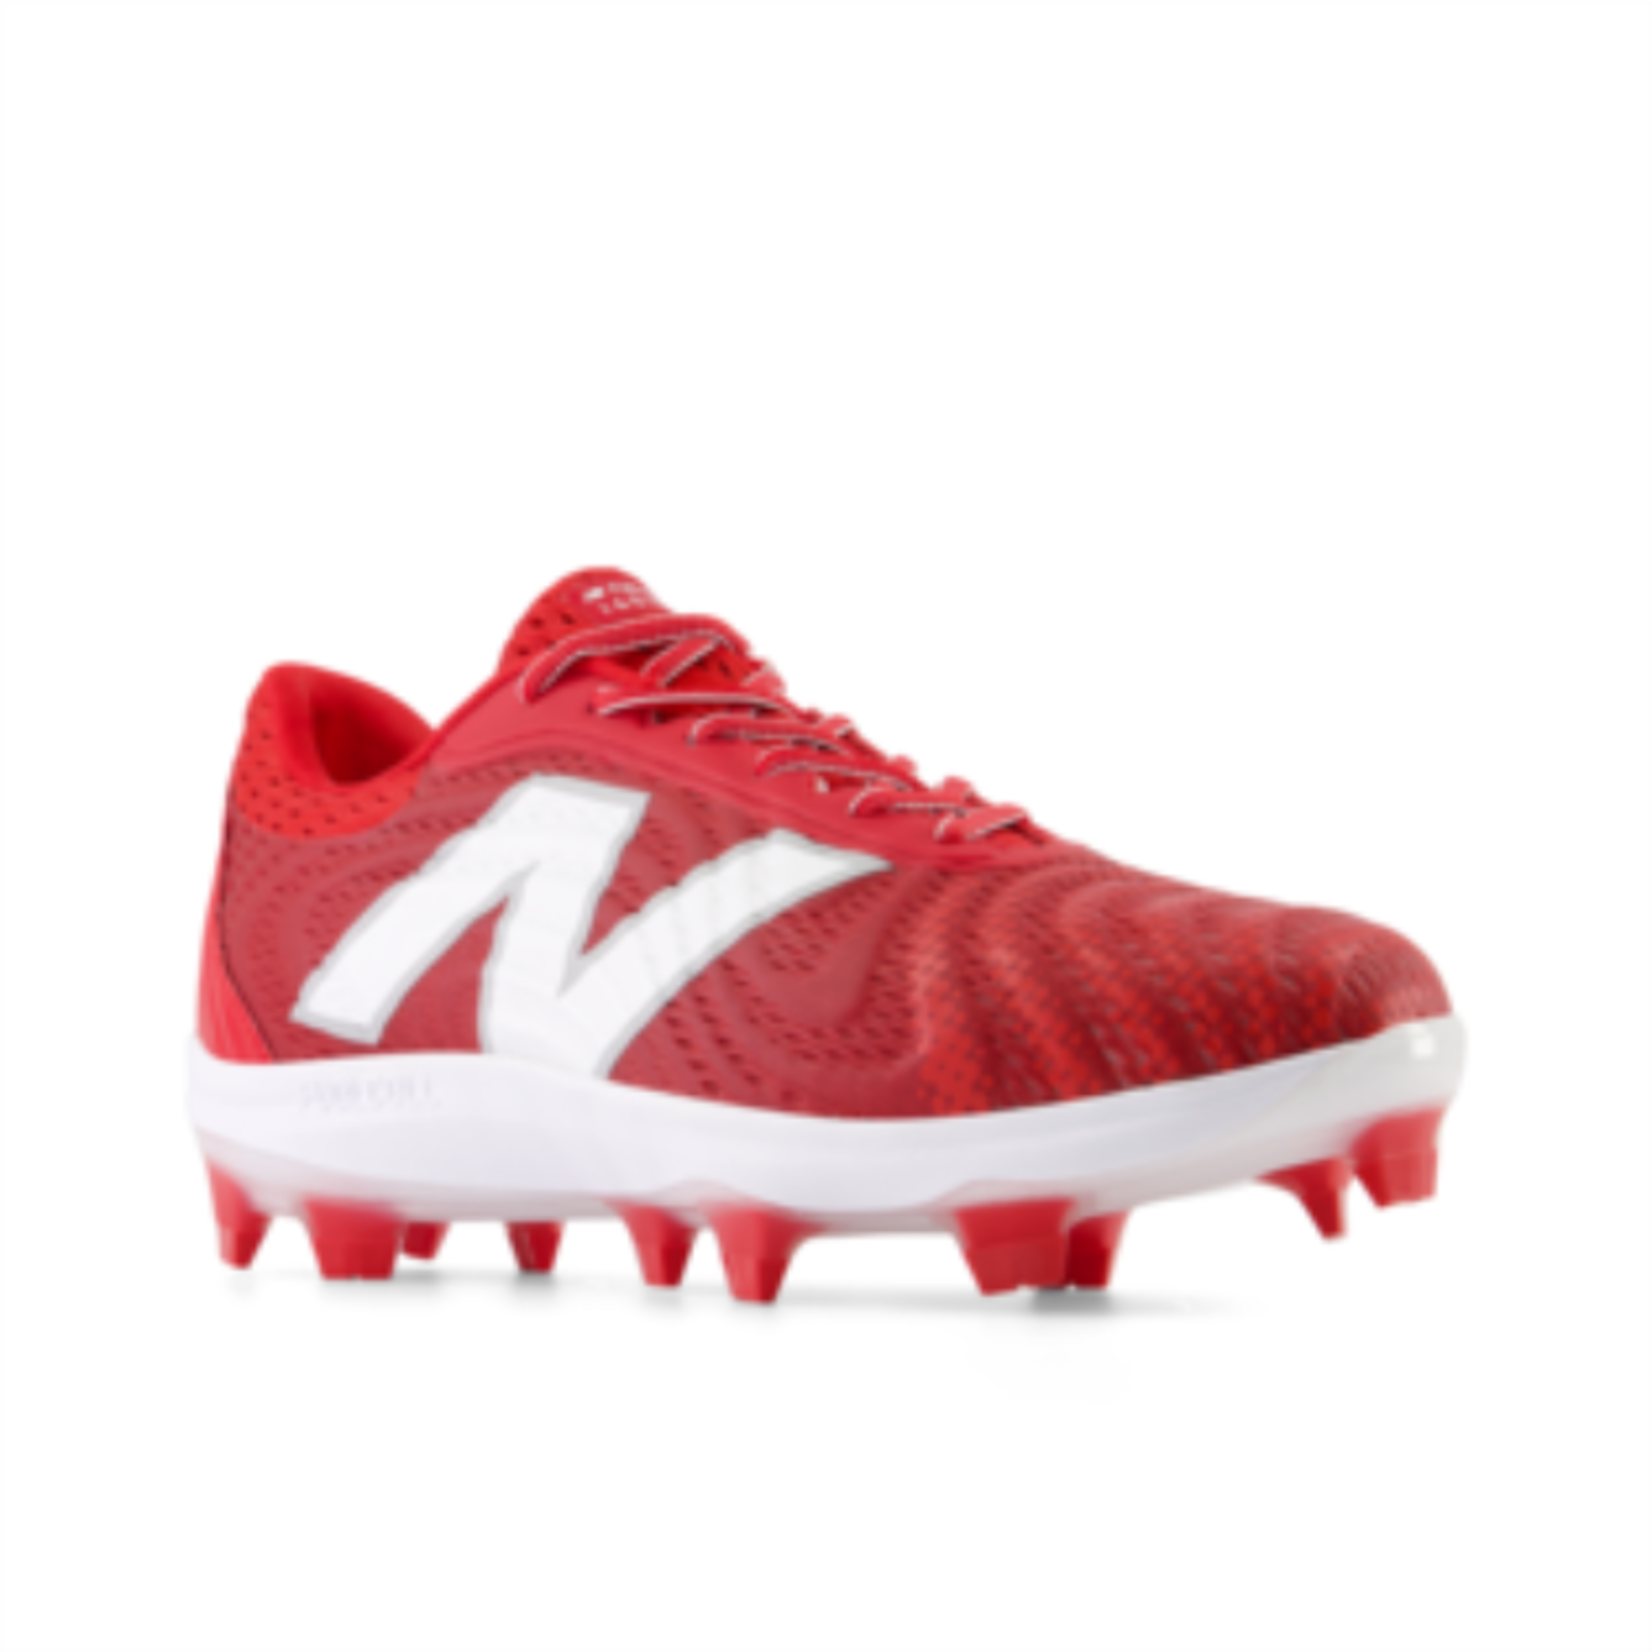 New Balance New Balance Baseball Shoes, FuelCell 4040 v7, Rubber Cleat, Mens